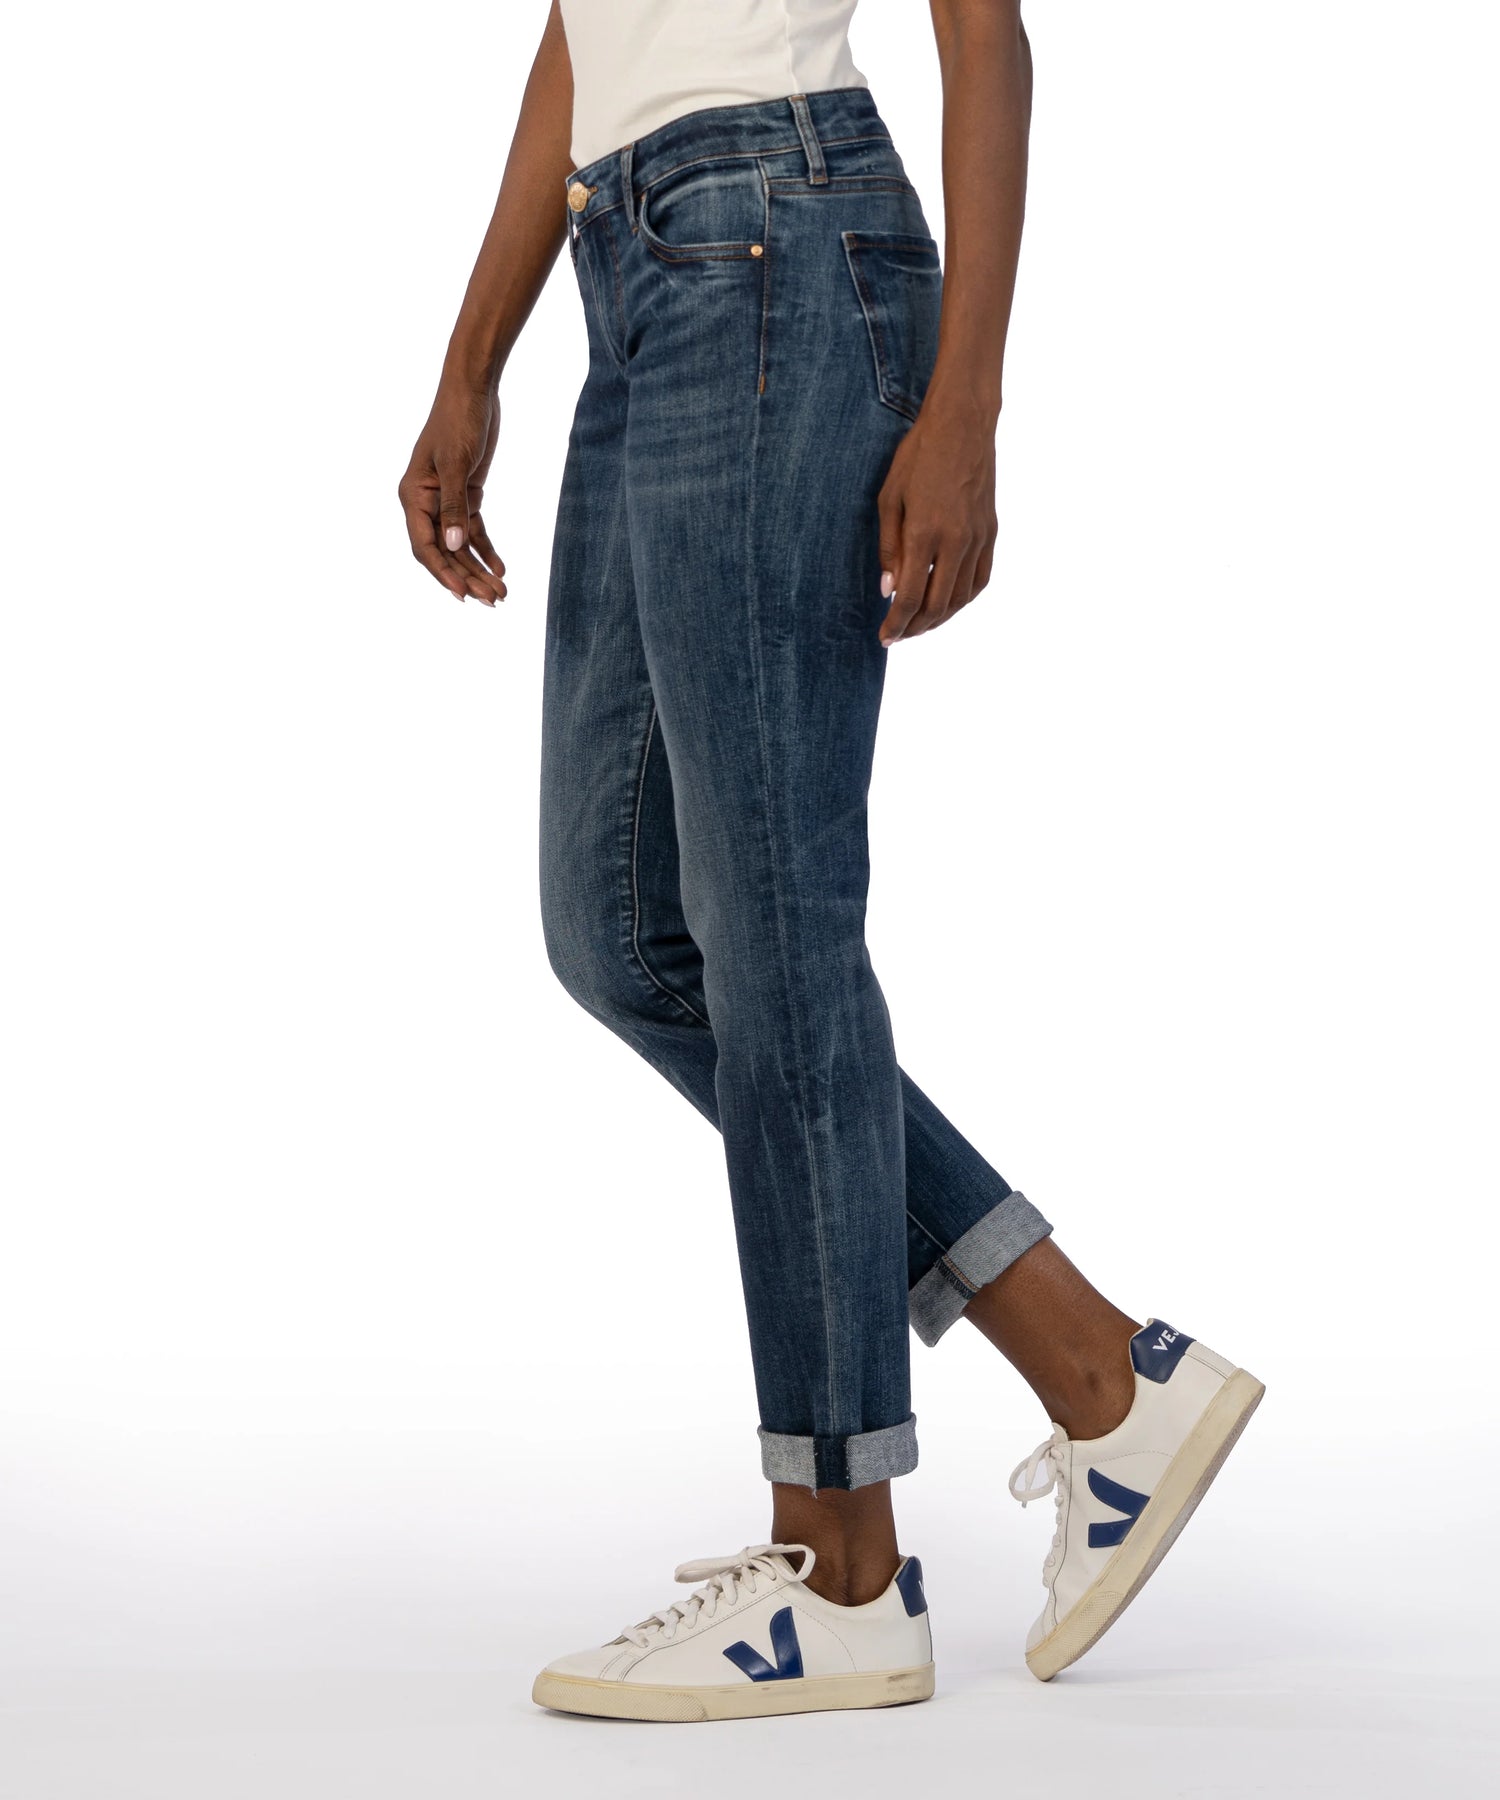 Kut From The Kloth Catherine Mid Rise Boyfriend Jeans (Inspired Wash)